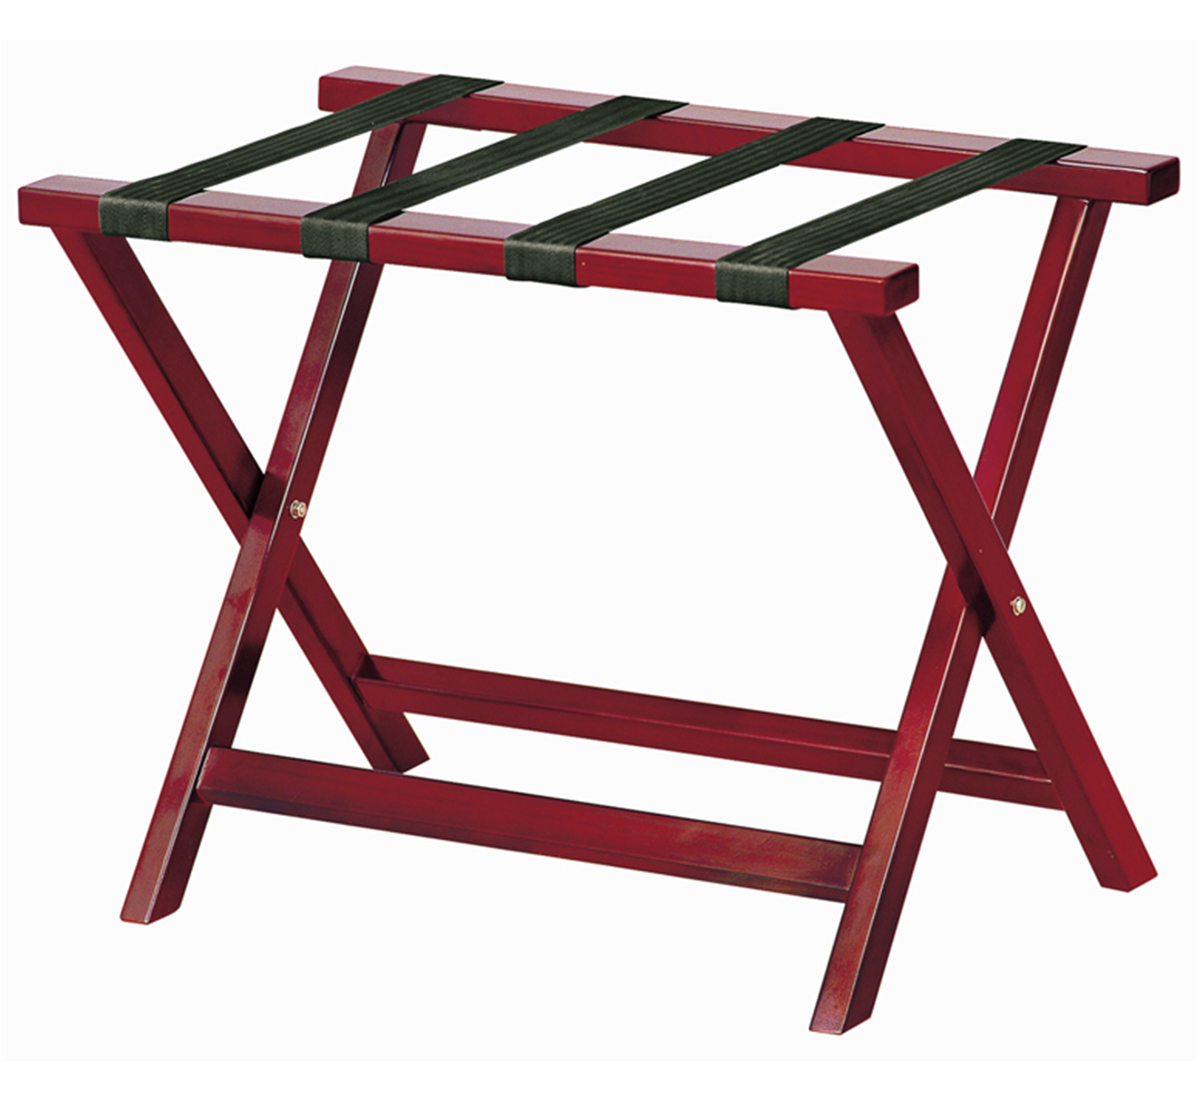 Cherry red luggage rack with nylon straps 